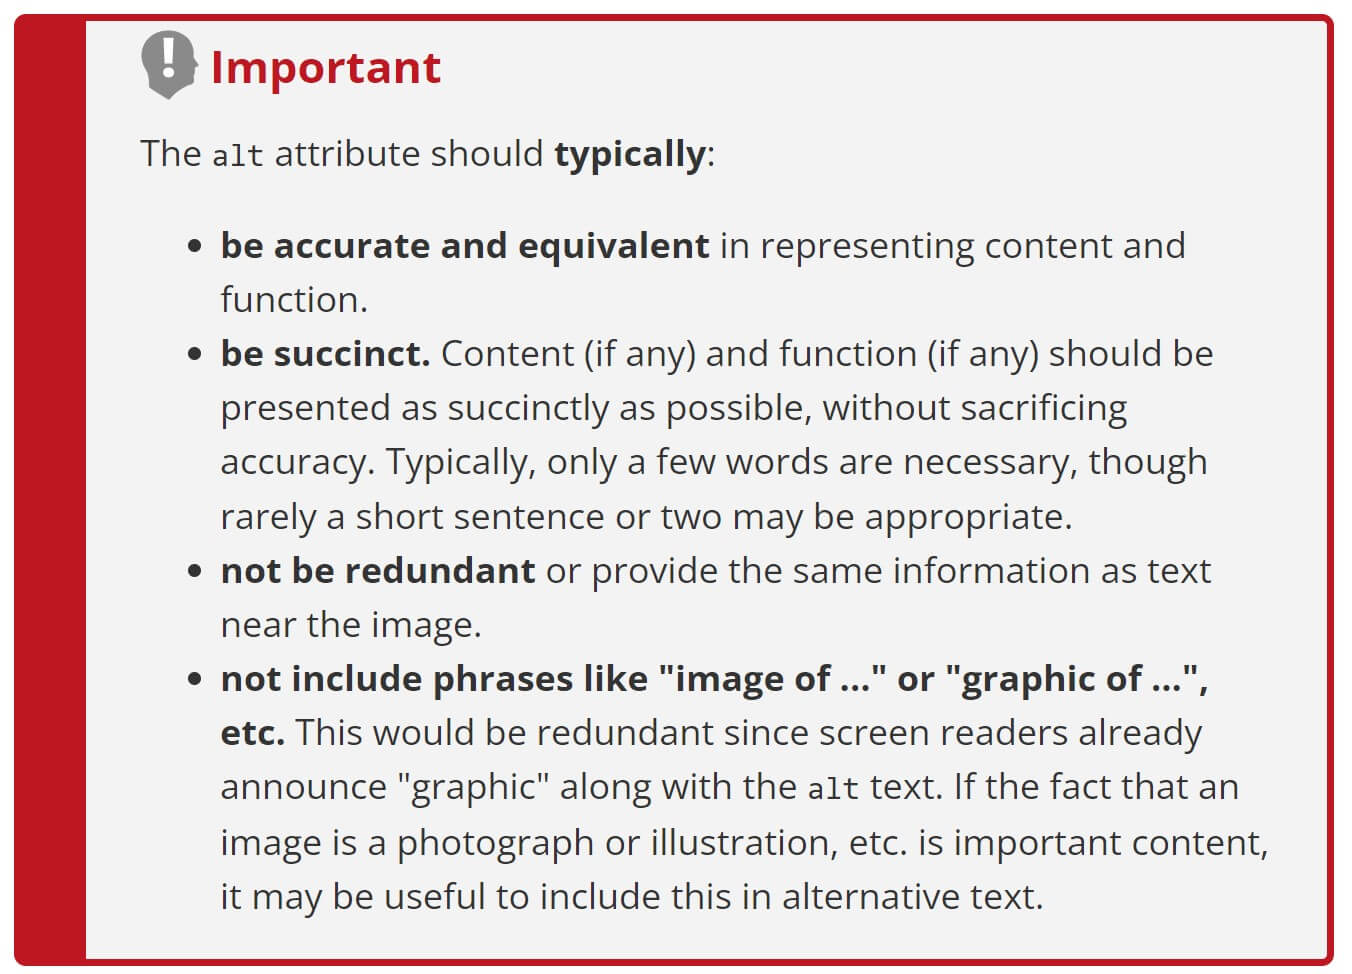 alt text best practices for accessibility and SEO